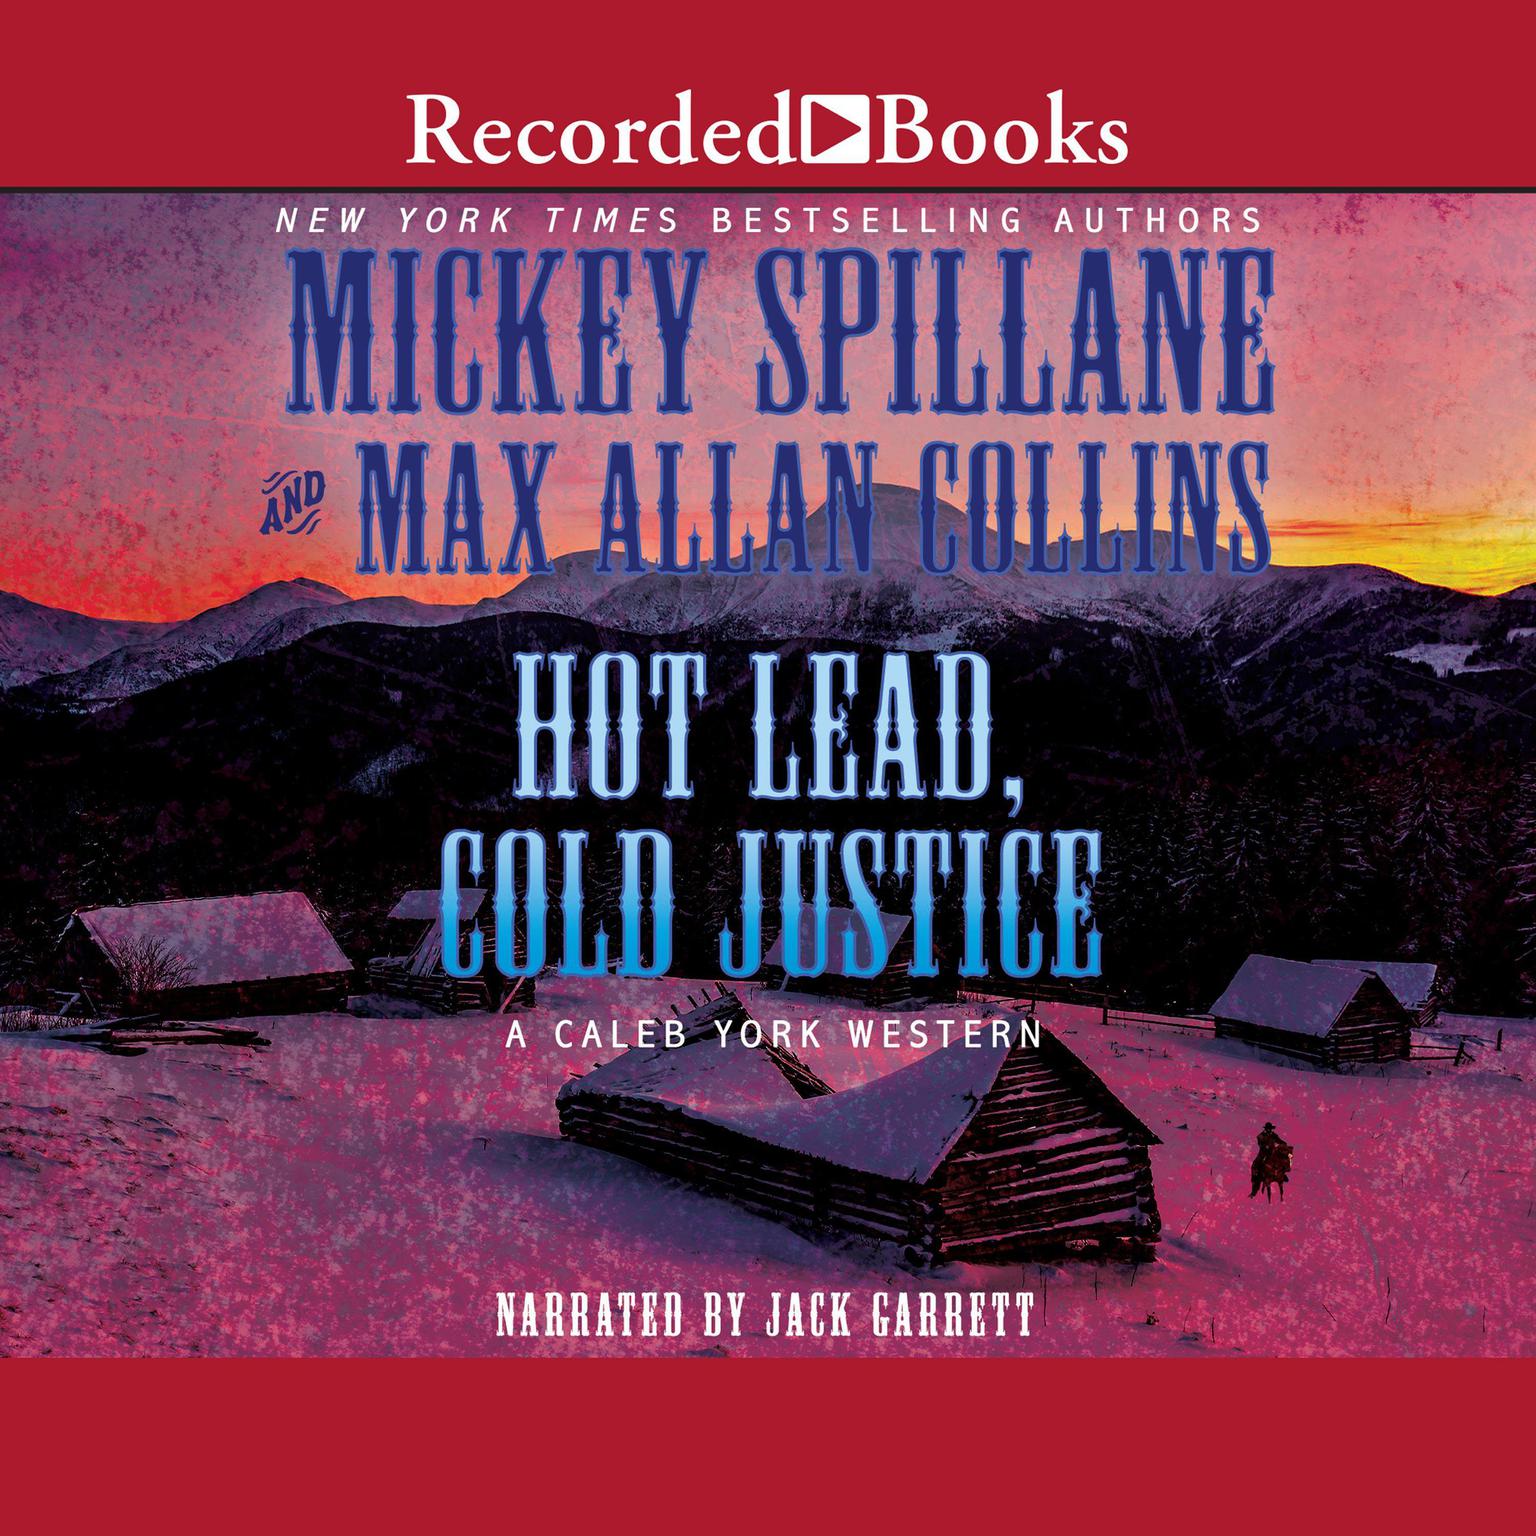 Hot Lead, Cold Justice Audiobook, by Mickey Spillane